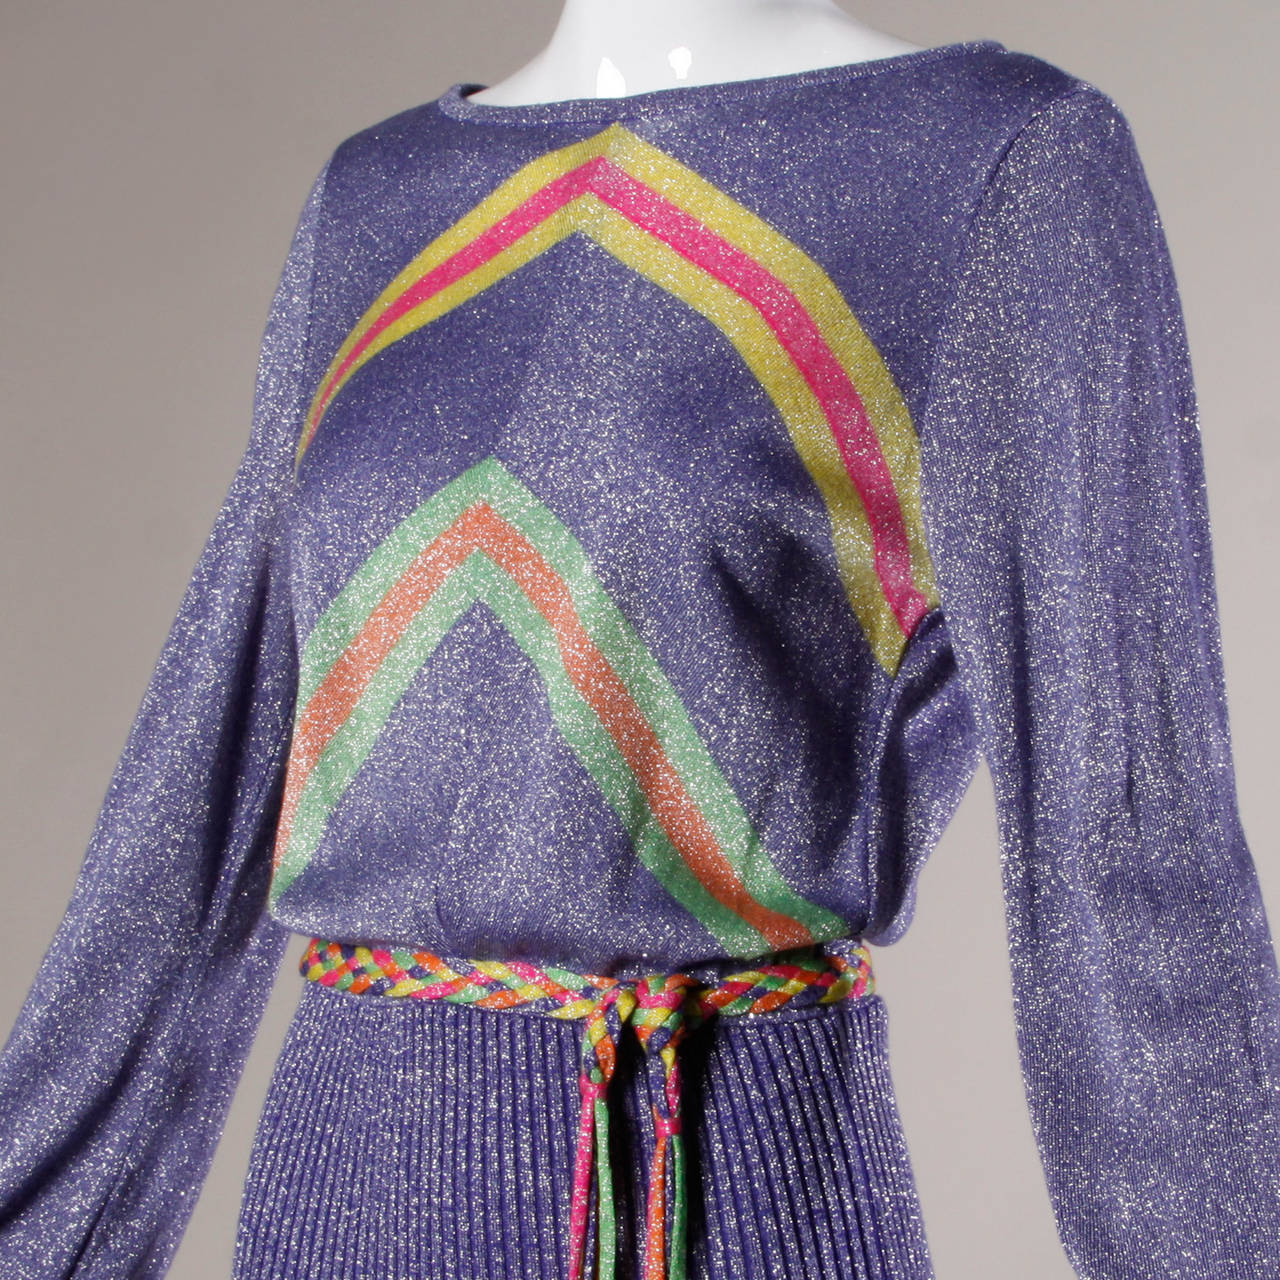 Banff Ltd. by Gianni Ferri purple metallic knit maxi dress with colorful stripes and a matching sash.

Details:

Unlined
Matching Belt
Back Zip Closure
Marked Size: Not Marked
Estimated Size: S-M
Color: Purple/ Silver Metallic/ Mustard/